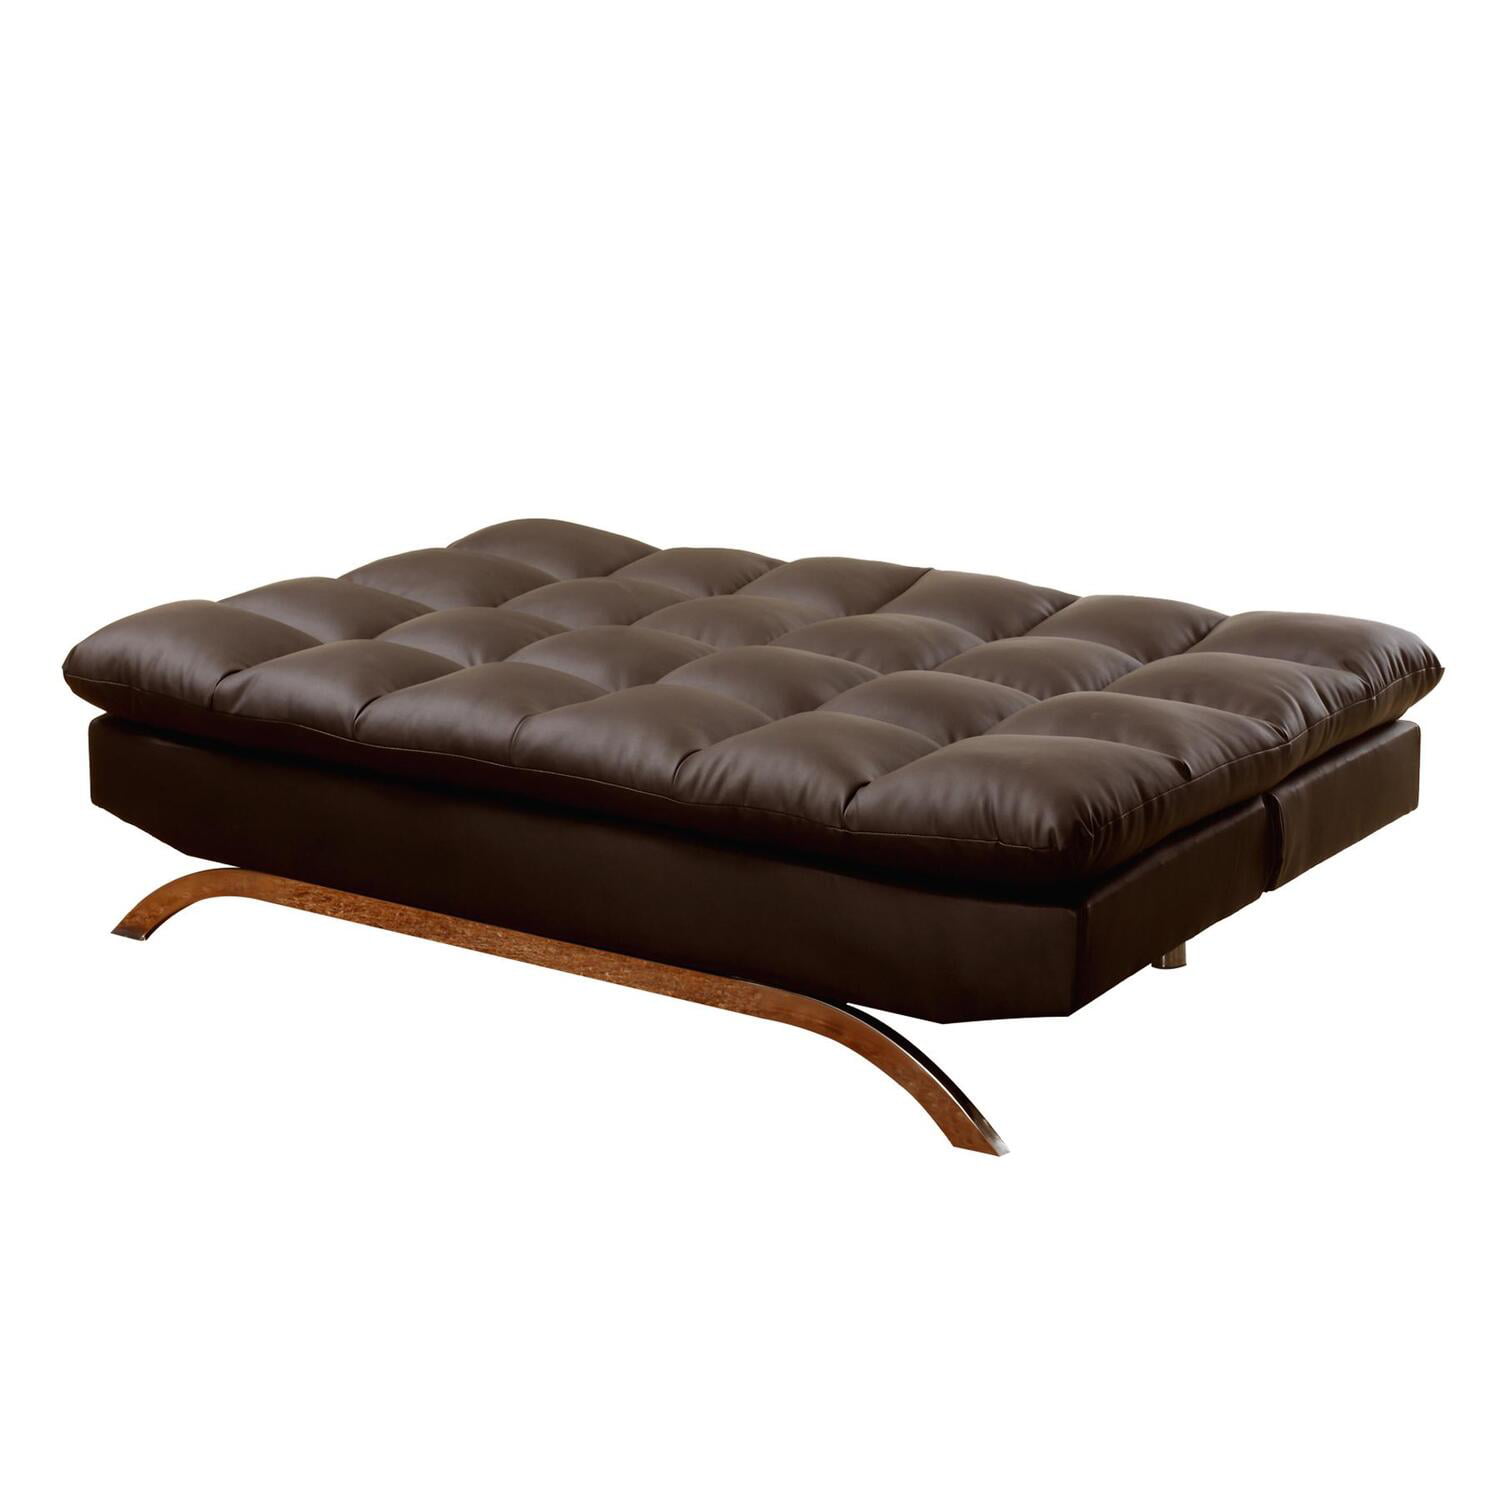 6 Black Futon Pad [6-BK] : Milton Greens Stars, Lowest Price Possible with  Best Possible Value